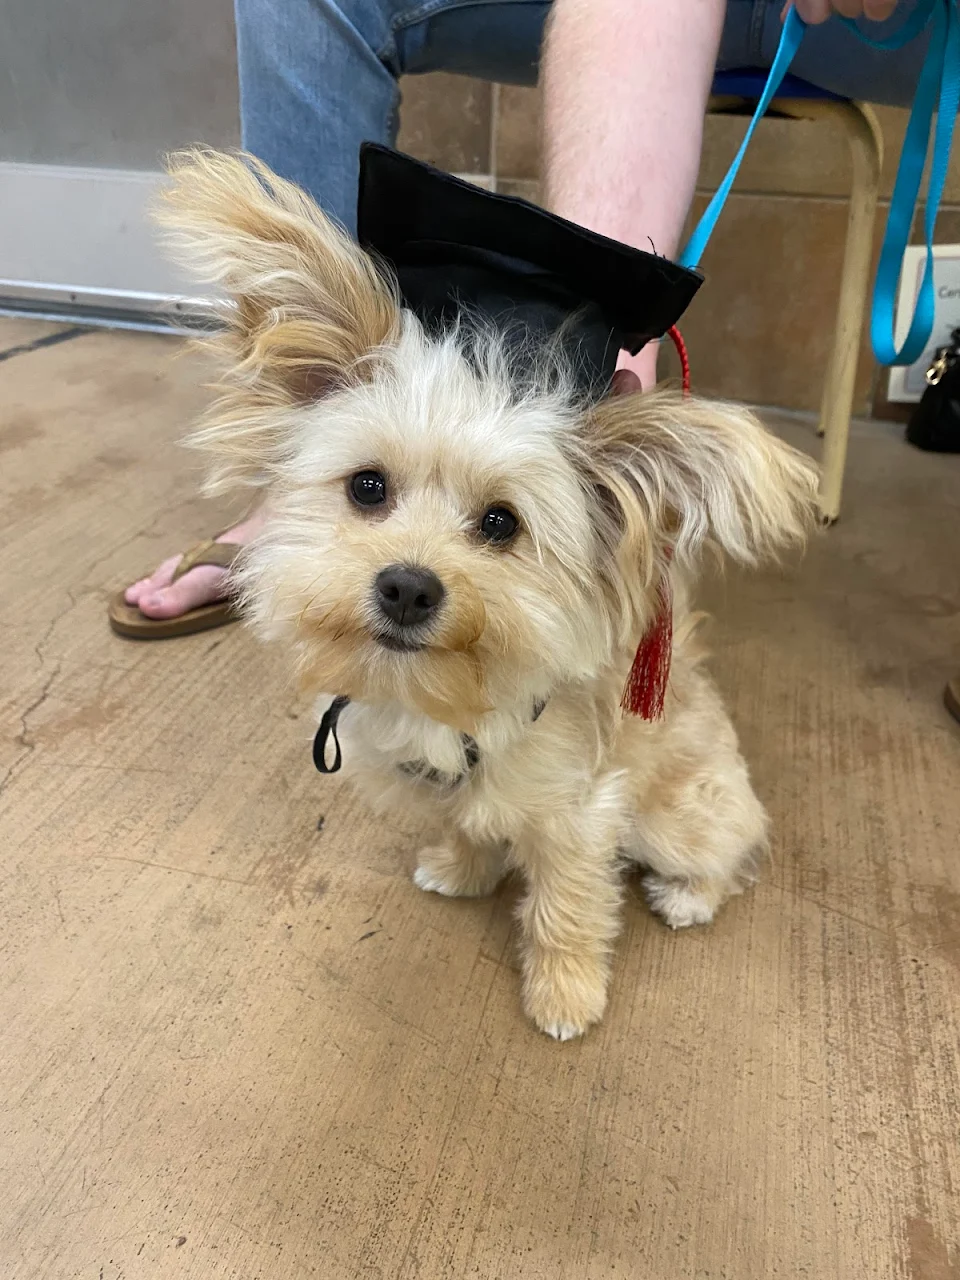 Teddy graduated his puppy training classes